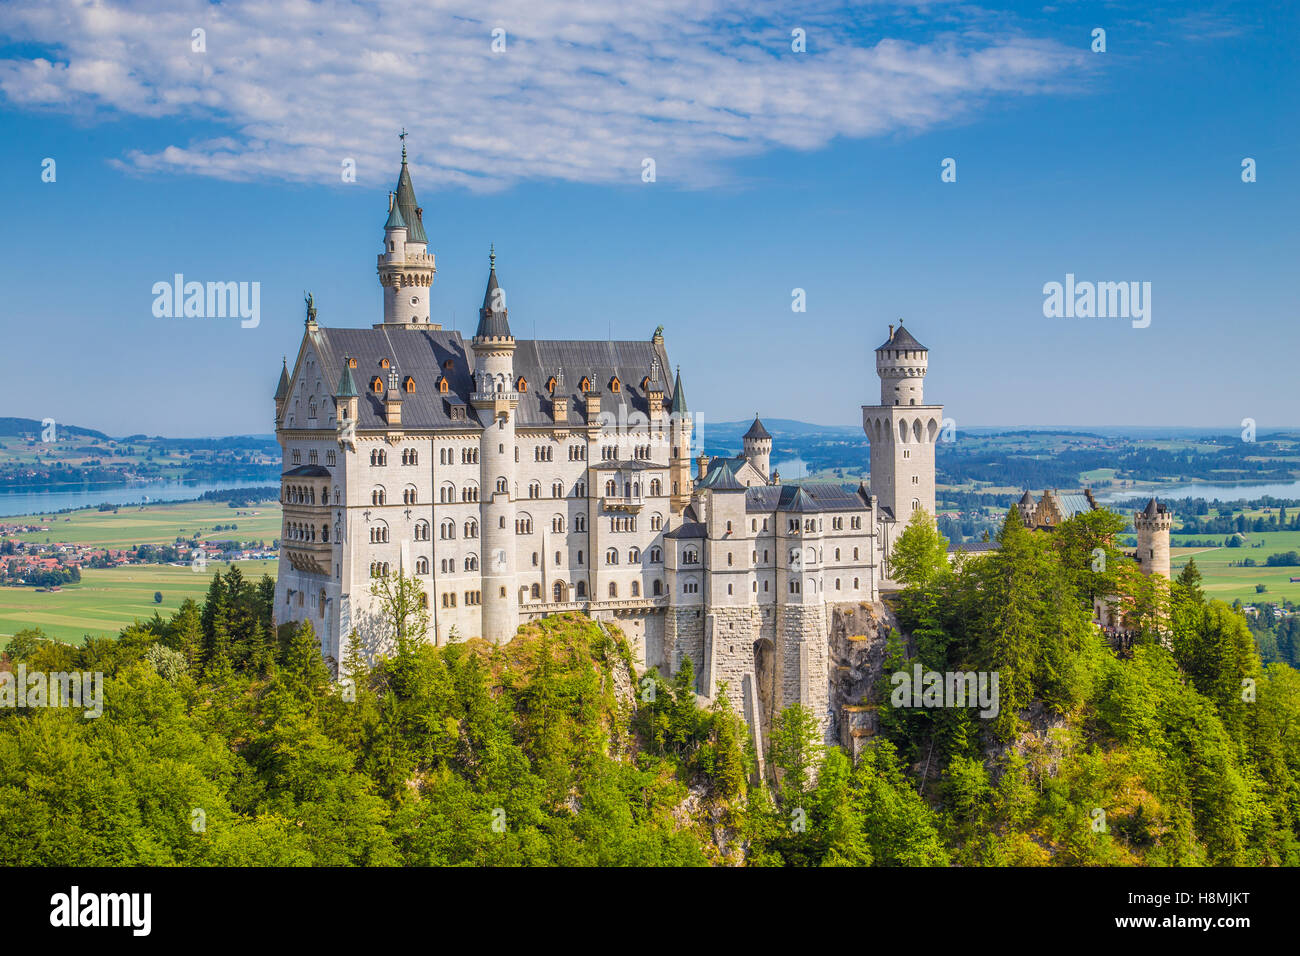 Classic view of world-famous Neuschwanstein Castle, one of Europe's most visited castles, on a beautiful sunny day in summer, Bavaria, Germany Stock Photo